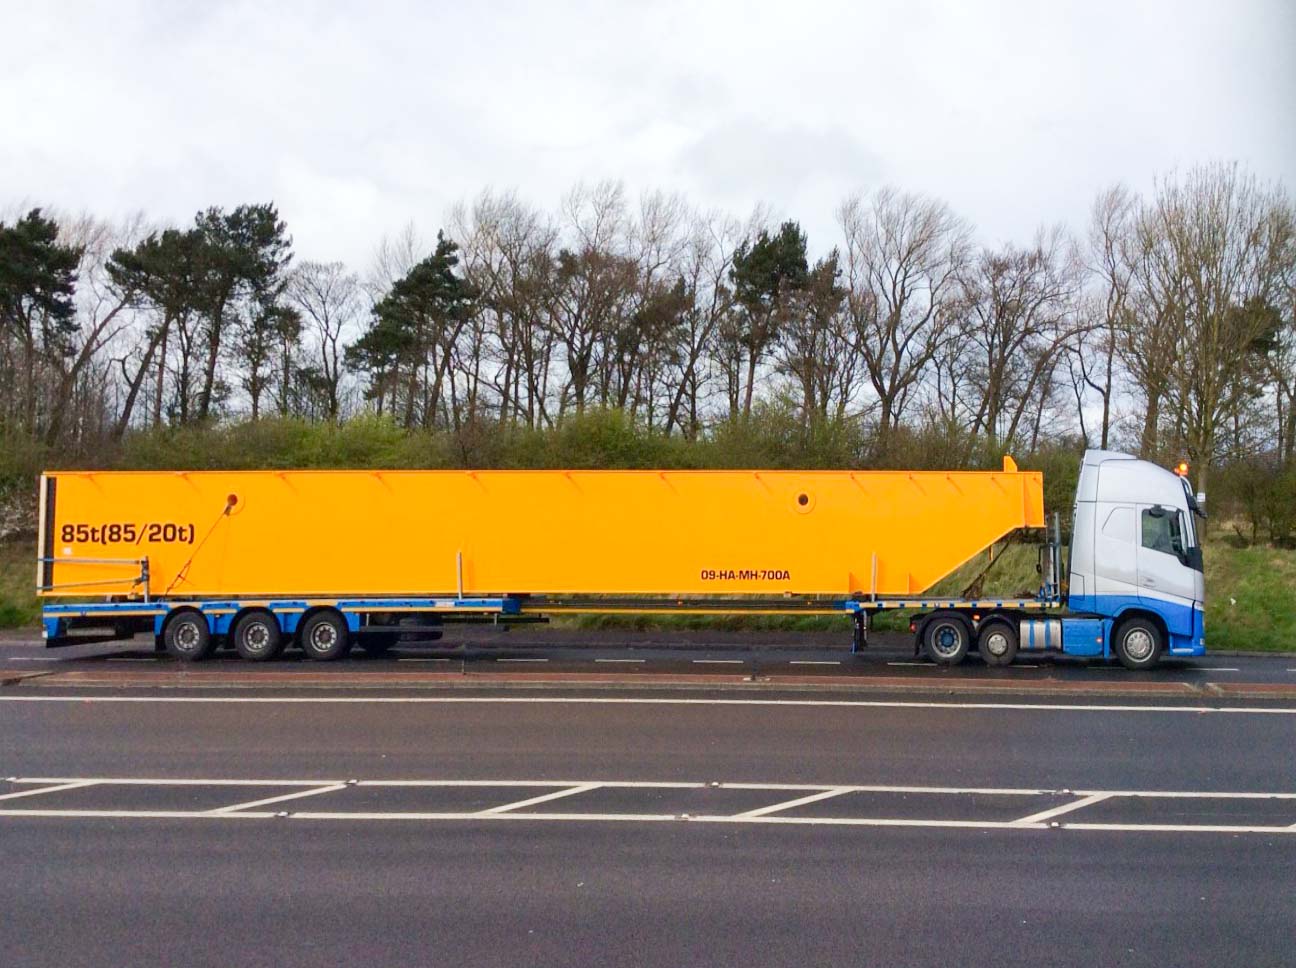 Extendable flatbeds type MAX200/MAX210 by MAX Trailer allow to transport long loads